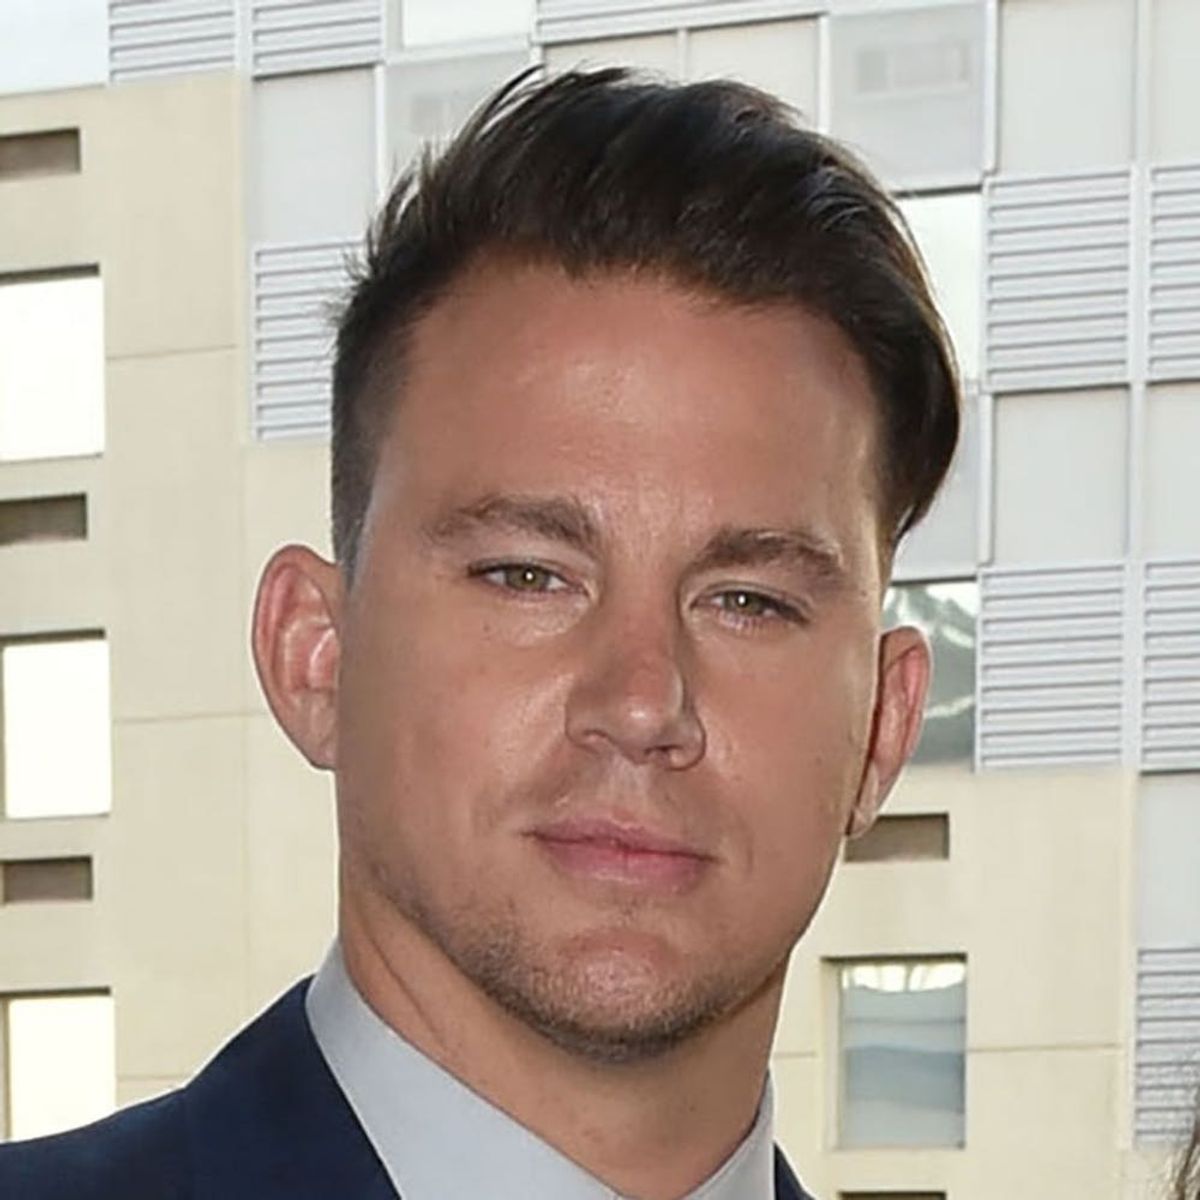 Channing Tatum Just Won Halloween With This Silly Costume